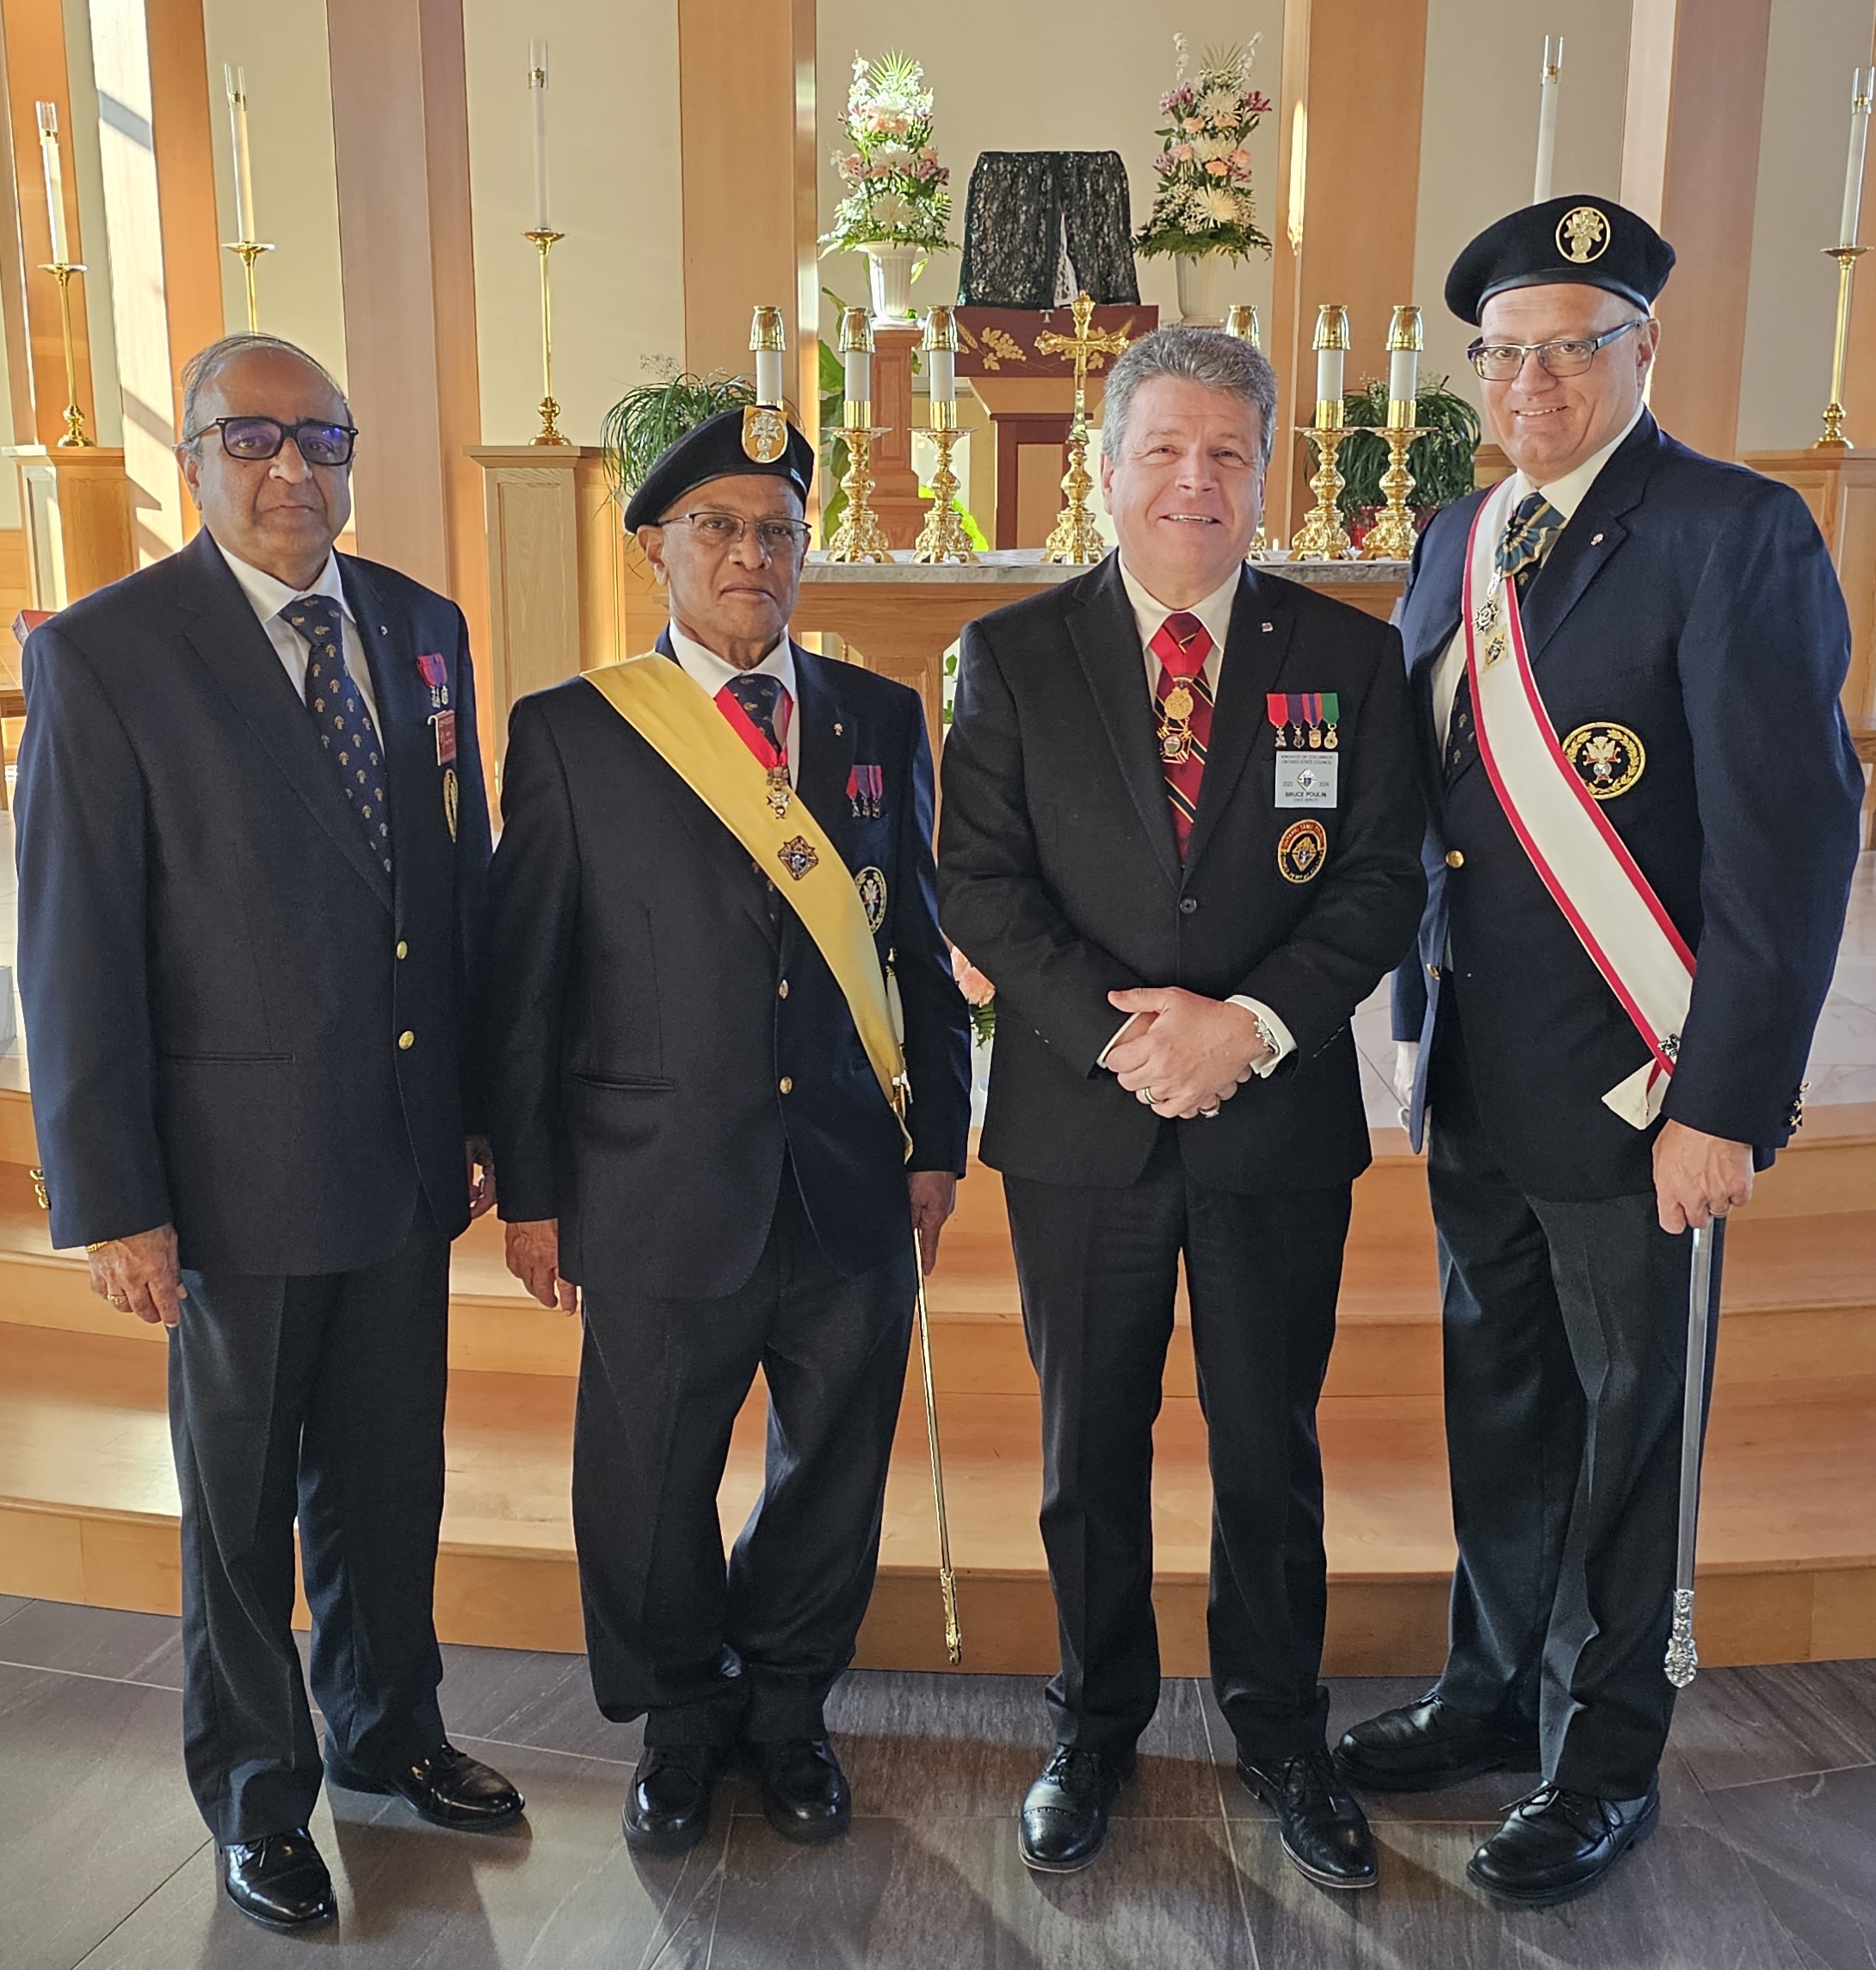 (LtoR) Faith Director and organizer of the Exemplification, Joseph Remedios, District 2 Master, Anthony D'Souza who was also celebrating his 78th birthday, State Deputy Bruce S. Poulin and Deputy Supreme Knight, Arthur Peters at the Fourth Degree Exemplification